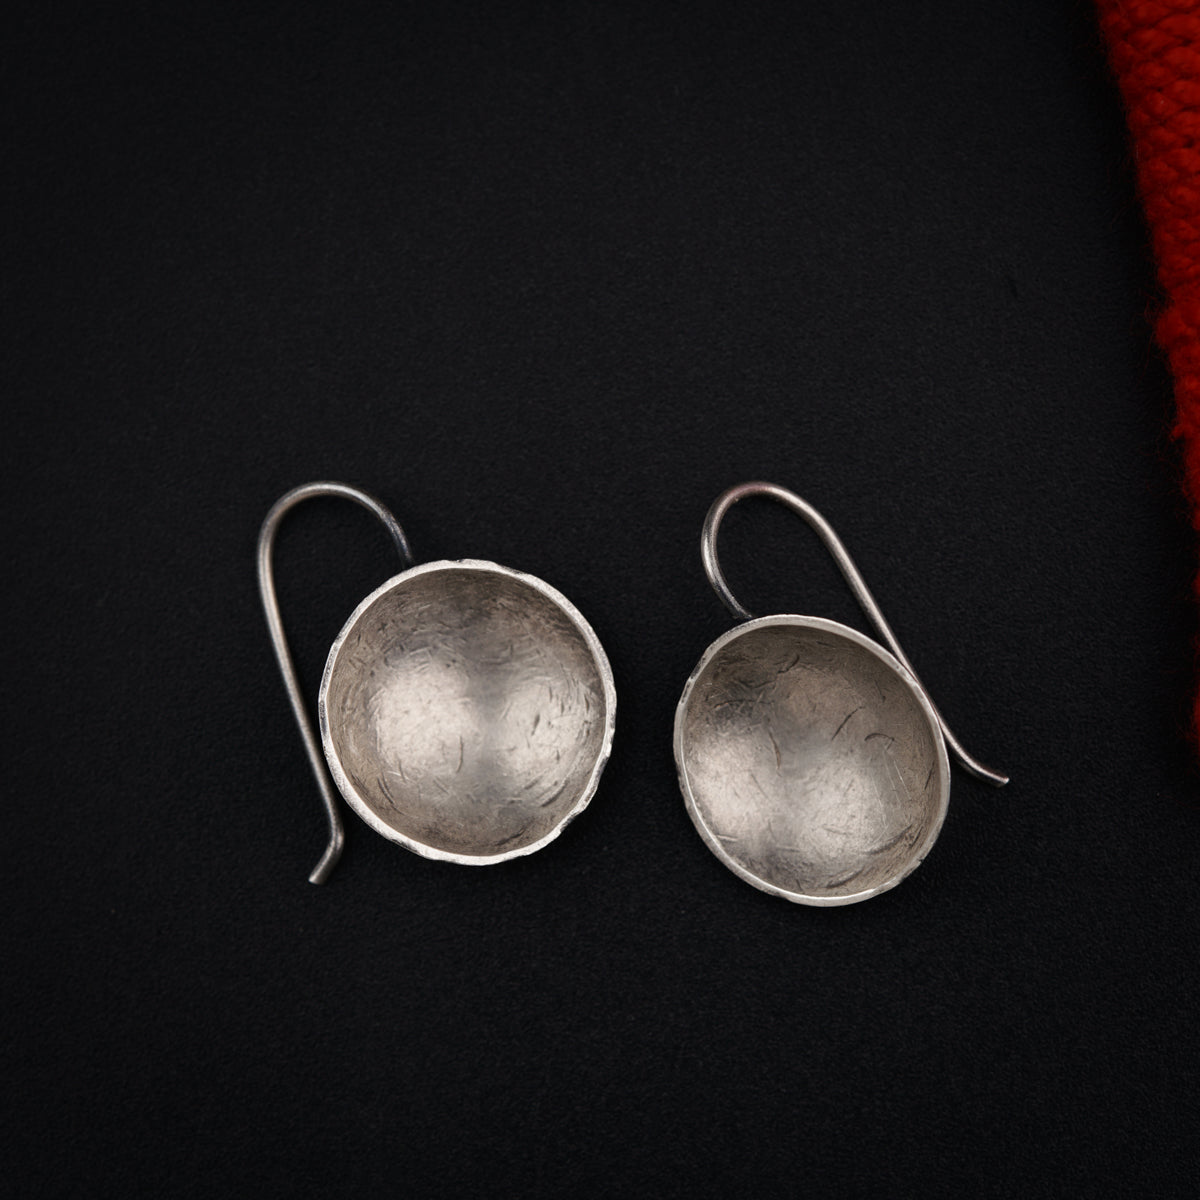 a pair of silver spoons sitting on top of a black surface